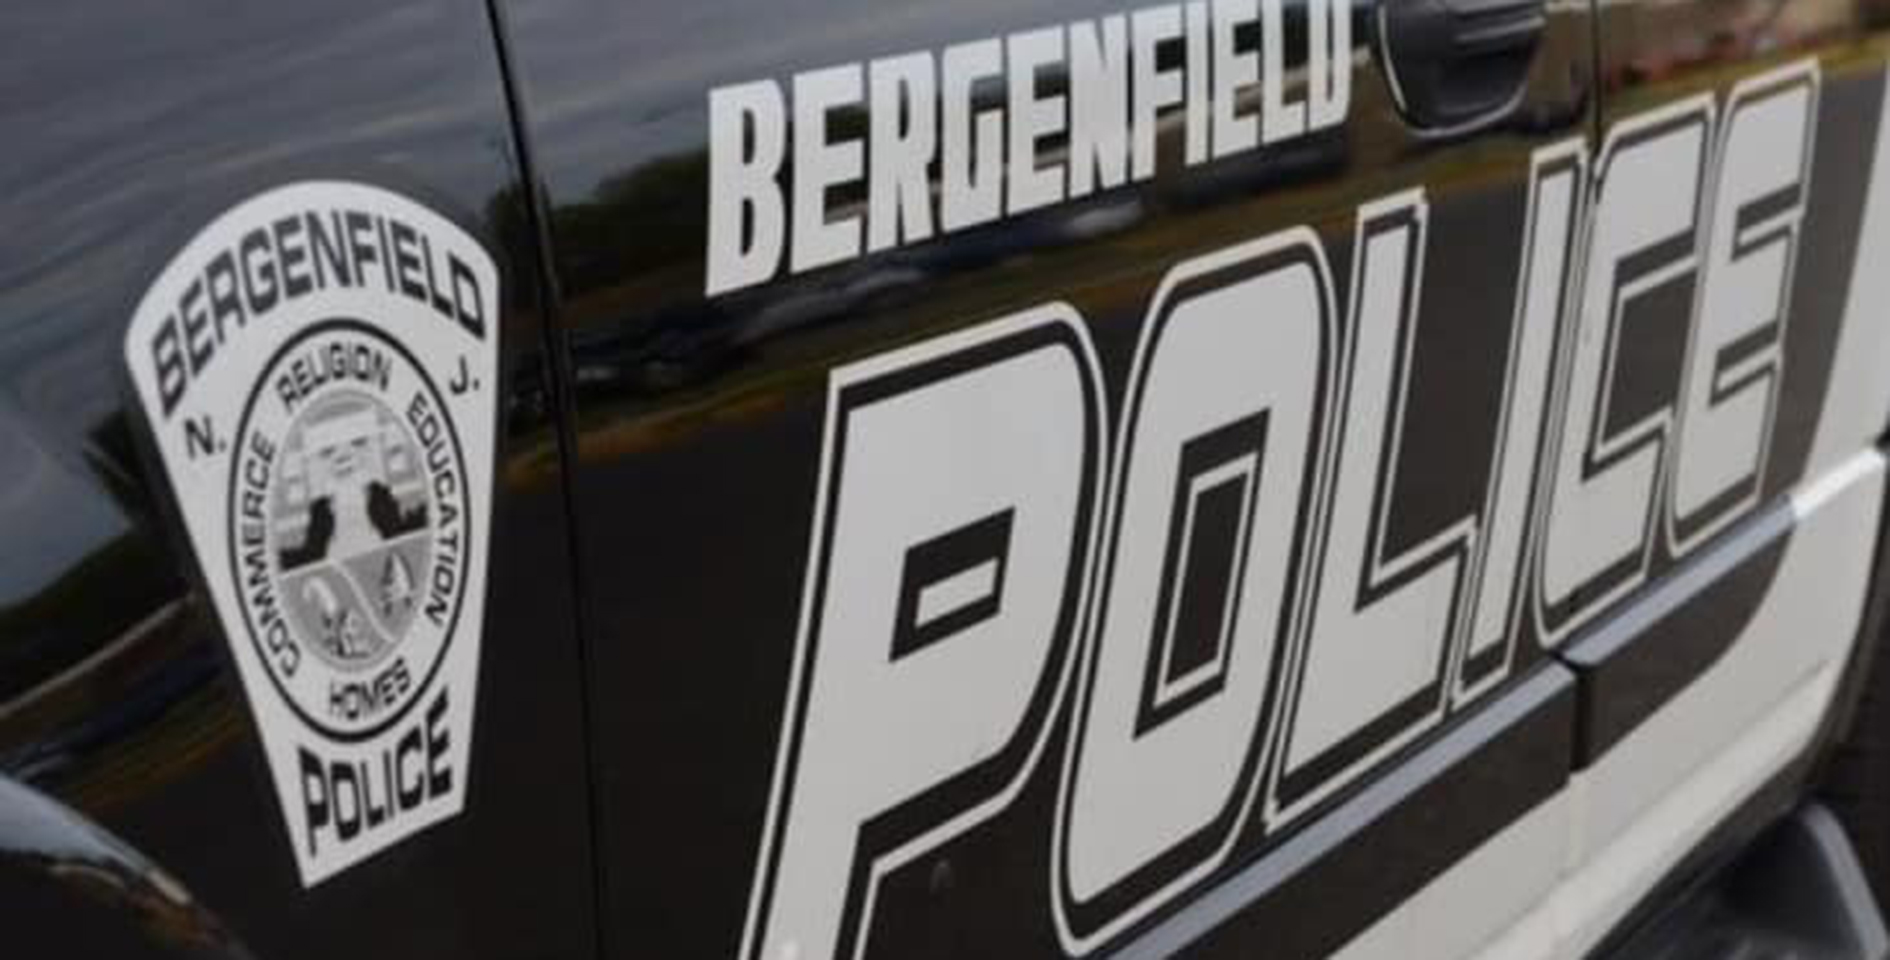 BERGENFIELD POLICE DEPARTMENT